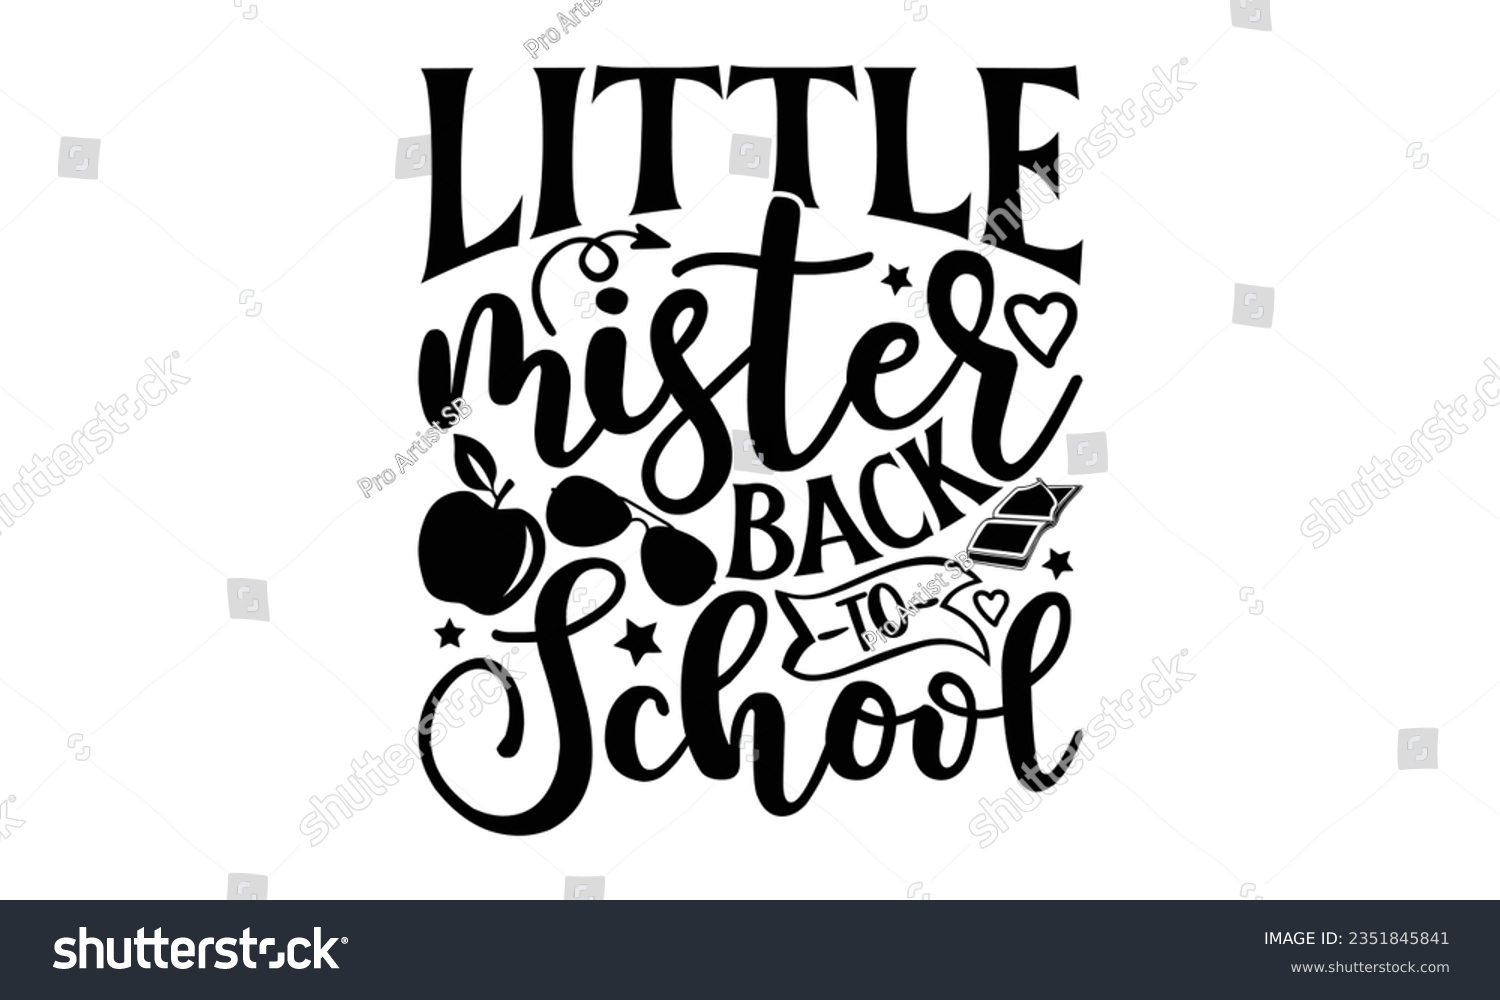 SVG of Little miss back to school - School SVG Design Sublimation, Back To School Quotes, Calligraphy Graphic Design, Typography Poster with Old Style Camera and Quote. svg